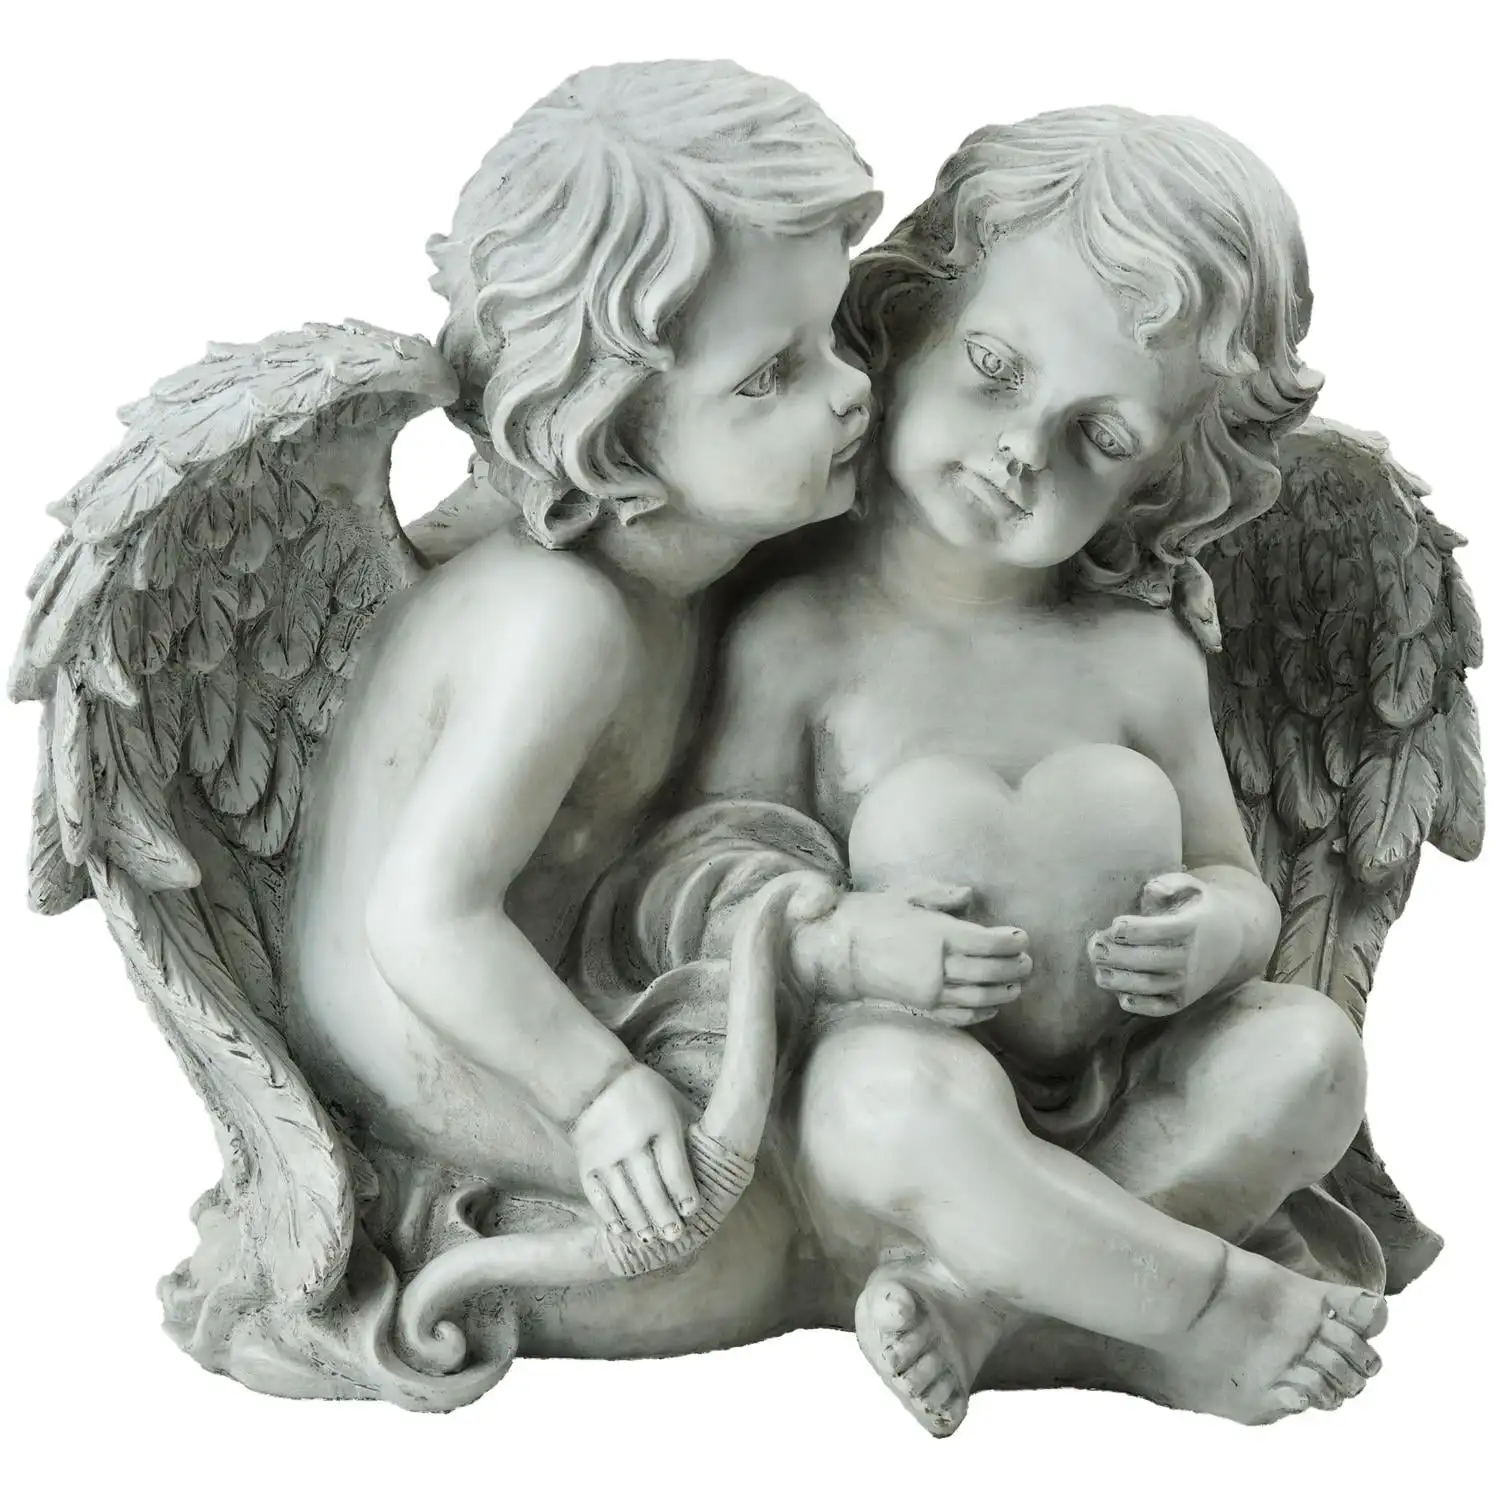 

16.25" Sitting Cherub Angels Holding a Heart and Bow Garden Statue Lawn Ornaments Figurines Sculpture for Outdoor Decor Yard Art